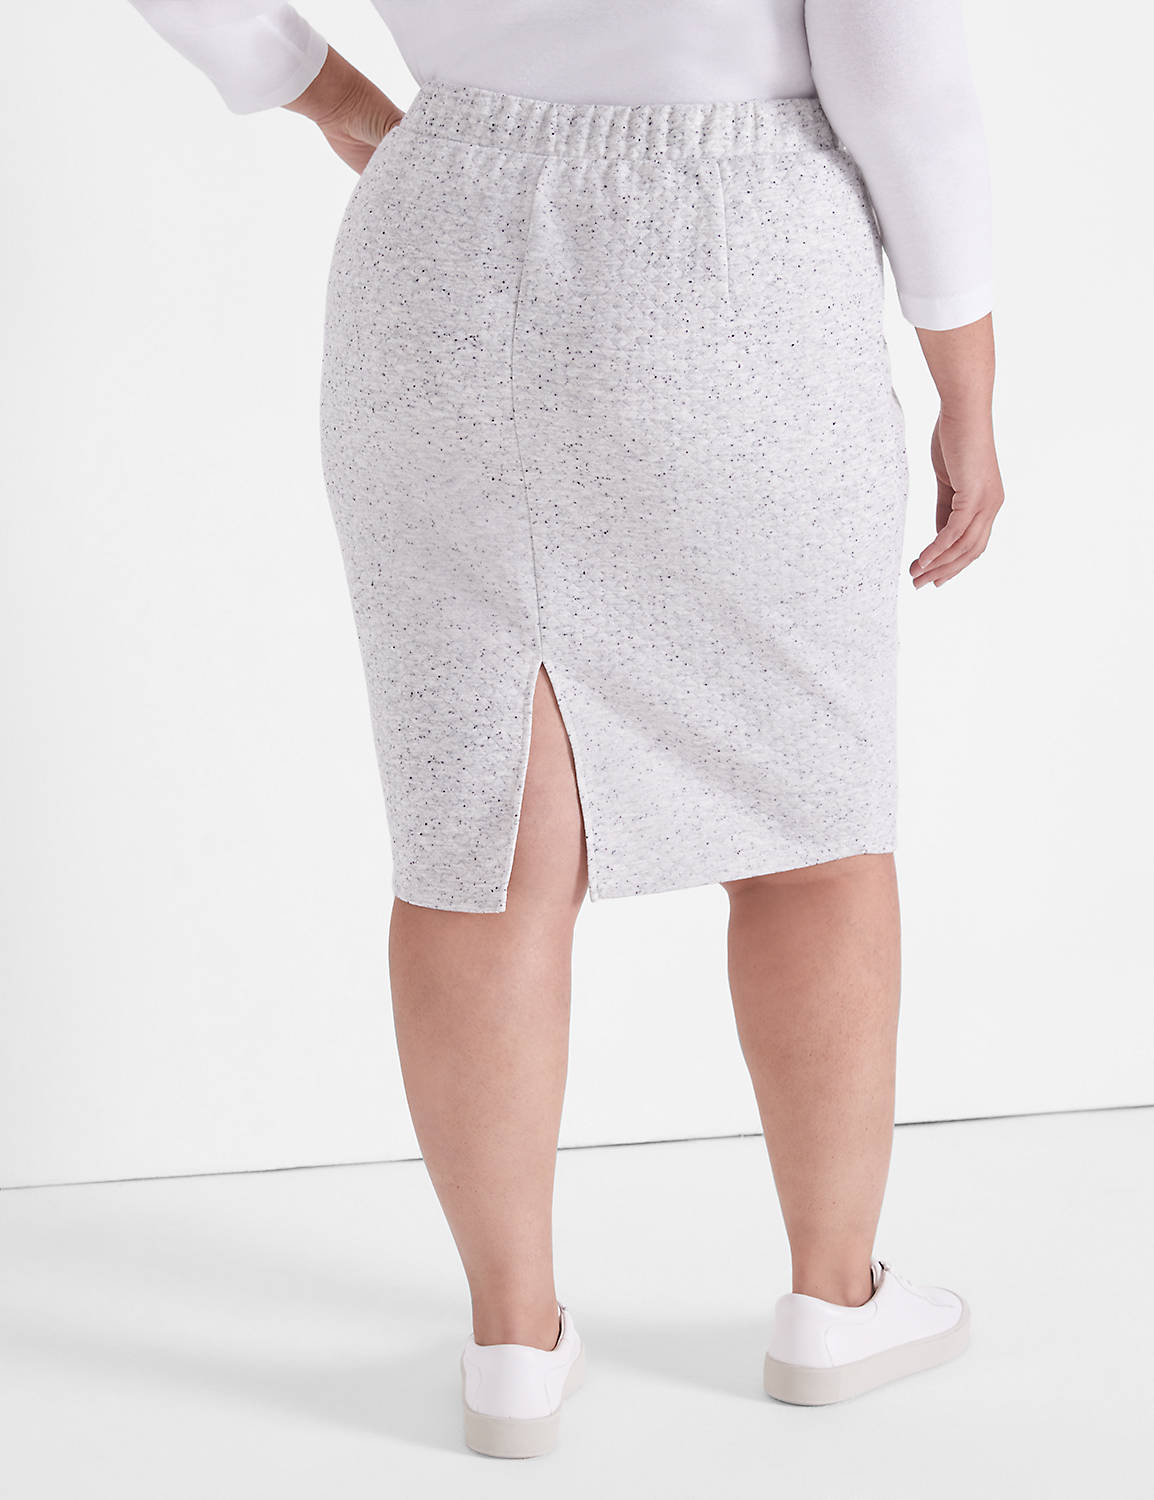 LIVI Mid Rise Quilted Skirt S 11328 Product Image 2